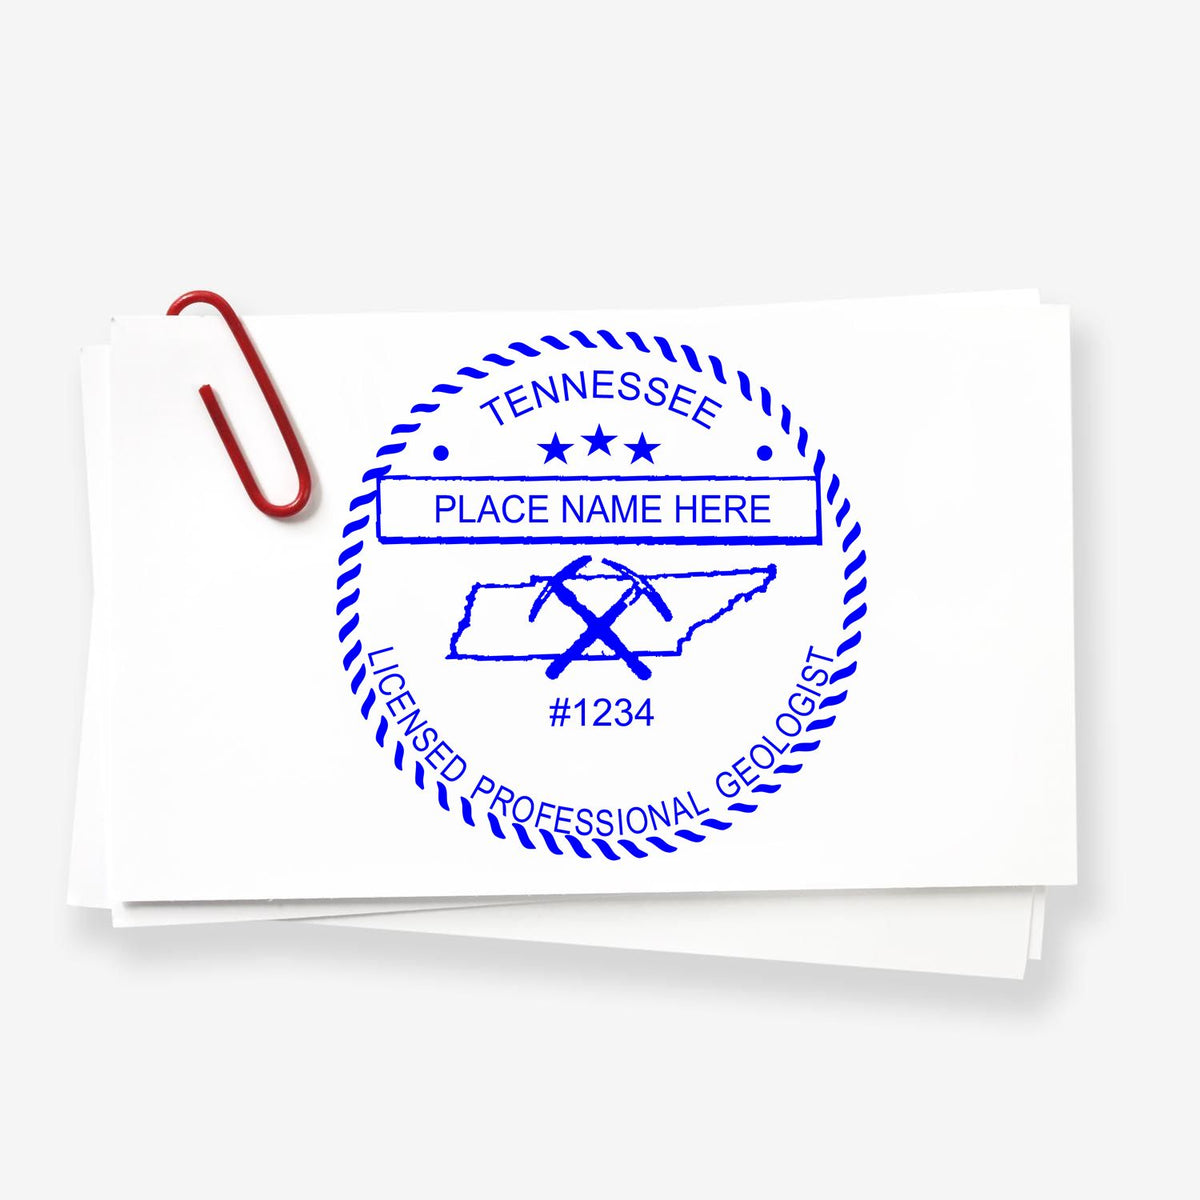 The Slim Pre-Inked Tennessee Professional Geologist Seal Stamp stamp impression comes to life with a crisp, detailed image stamped on paper - showcasing true professional quality.